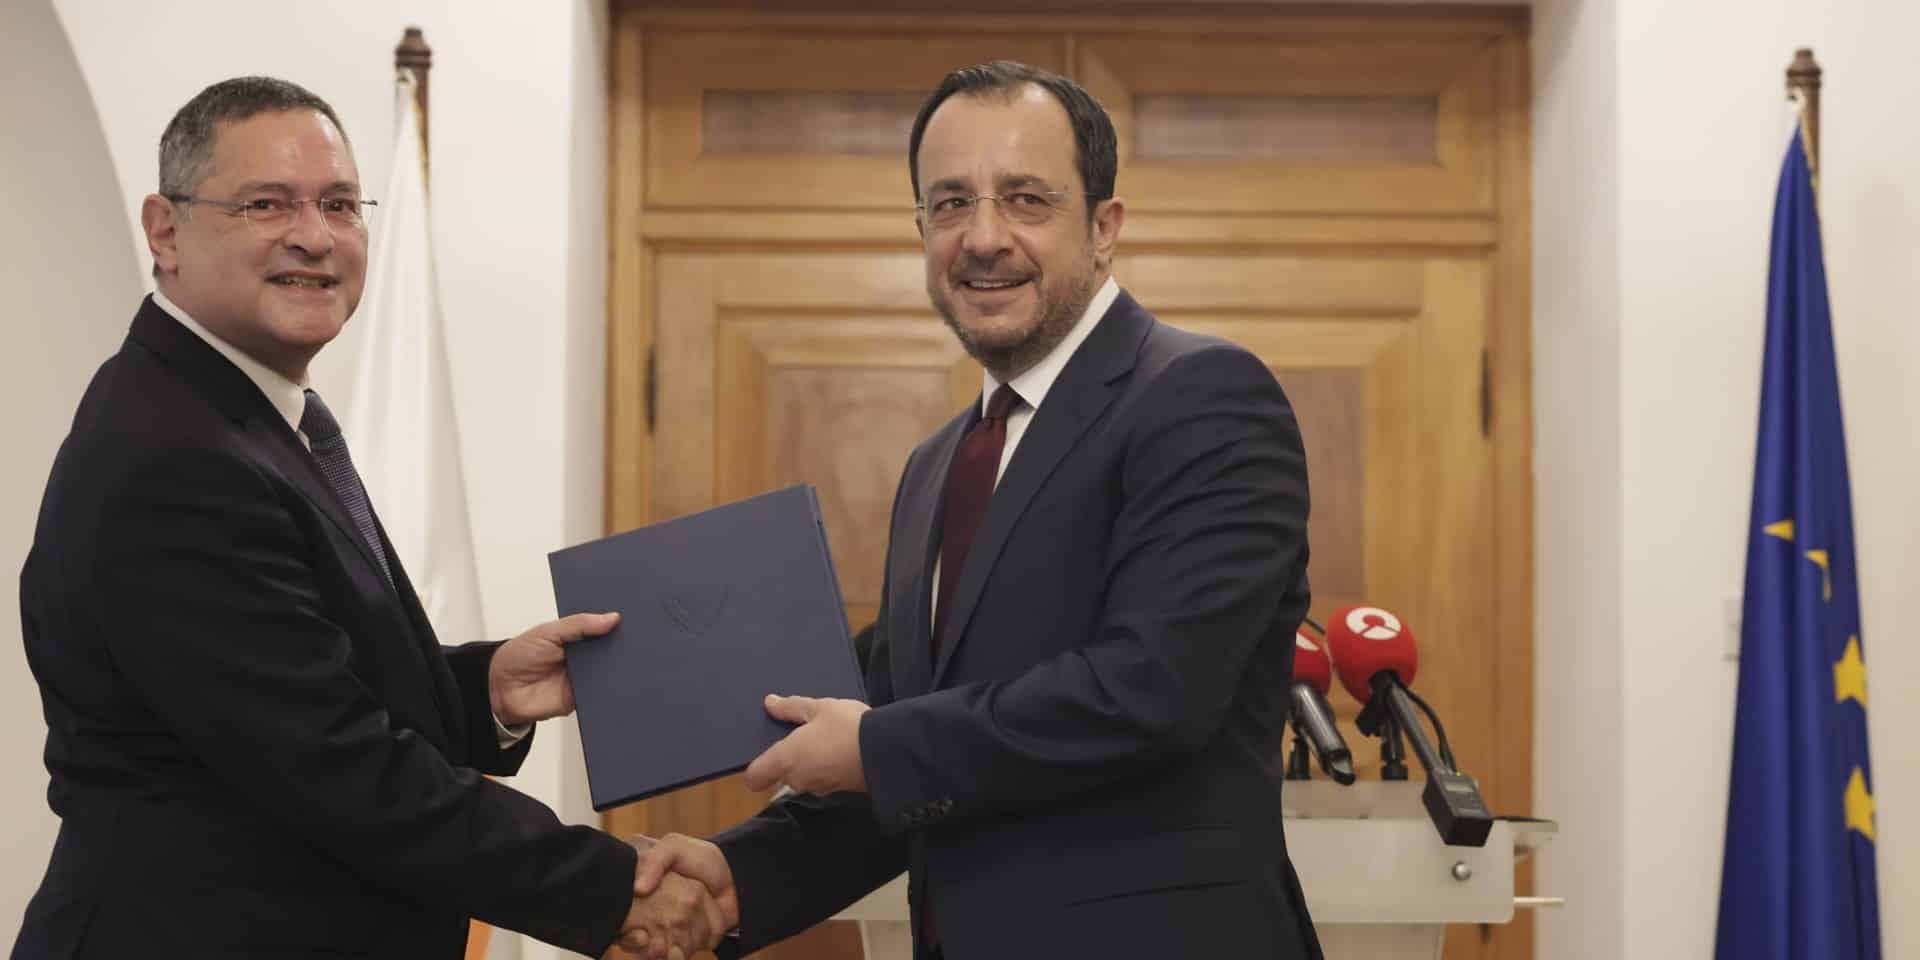 image Christodoulos Patsalides sworn in as Central Bank governor